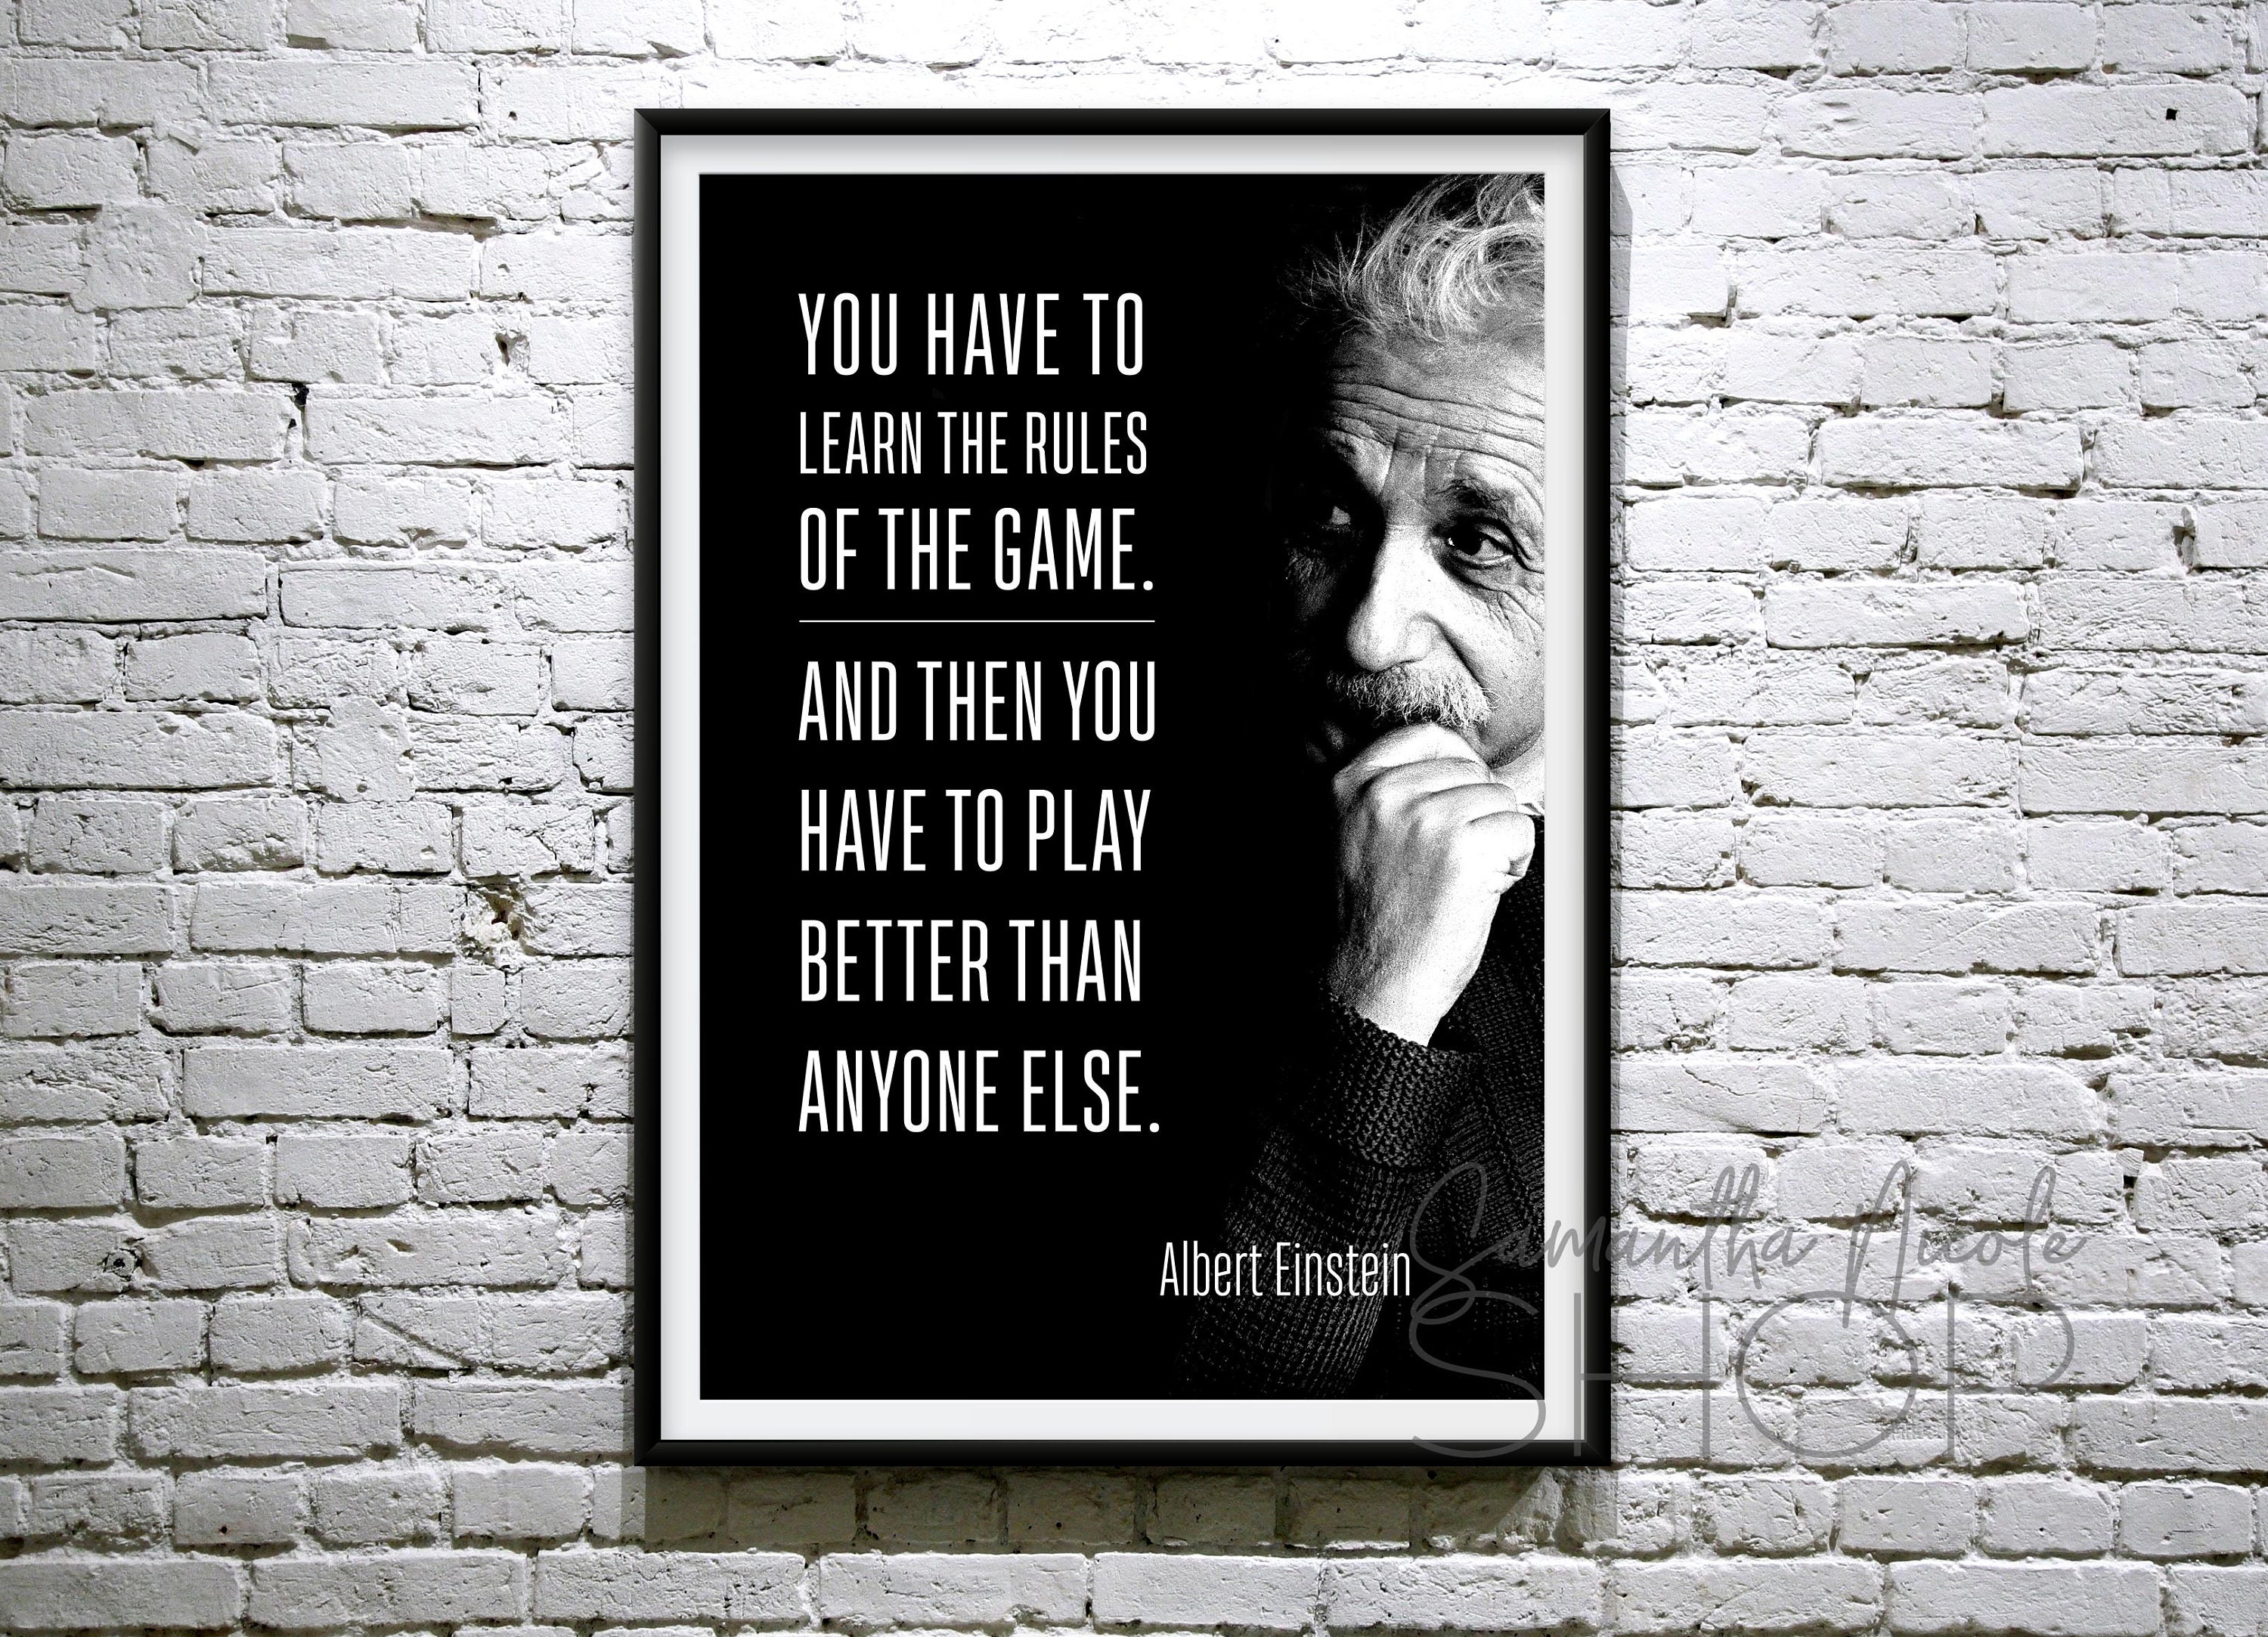 Learn the rules of the game; then play better than everyone else